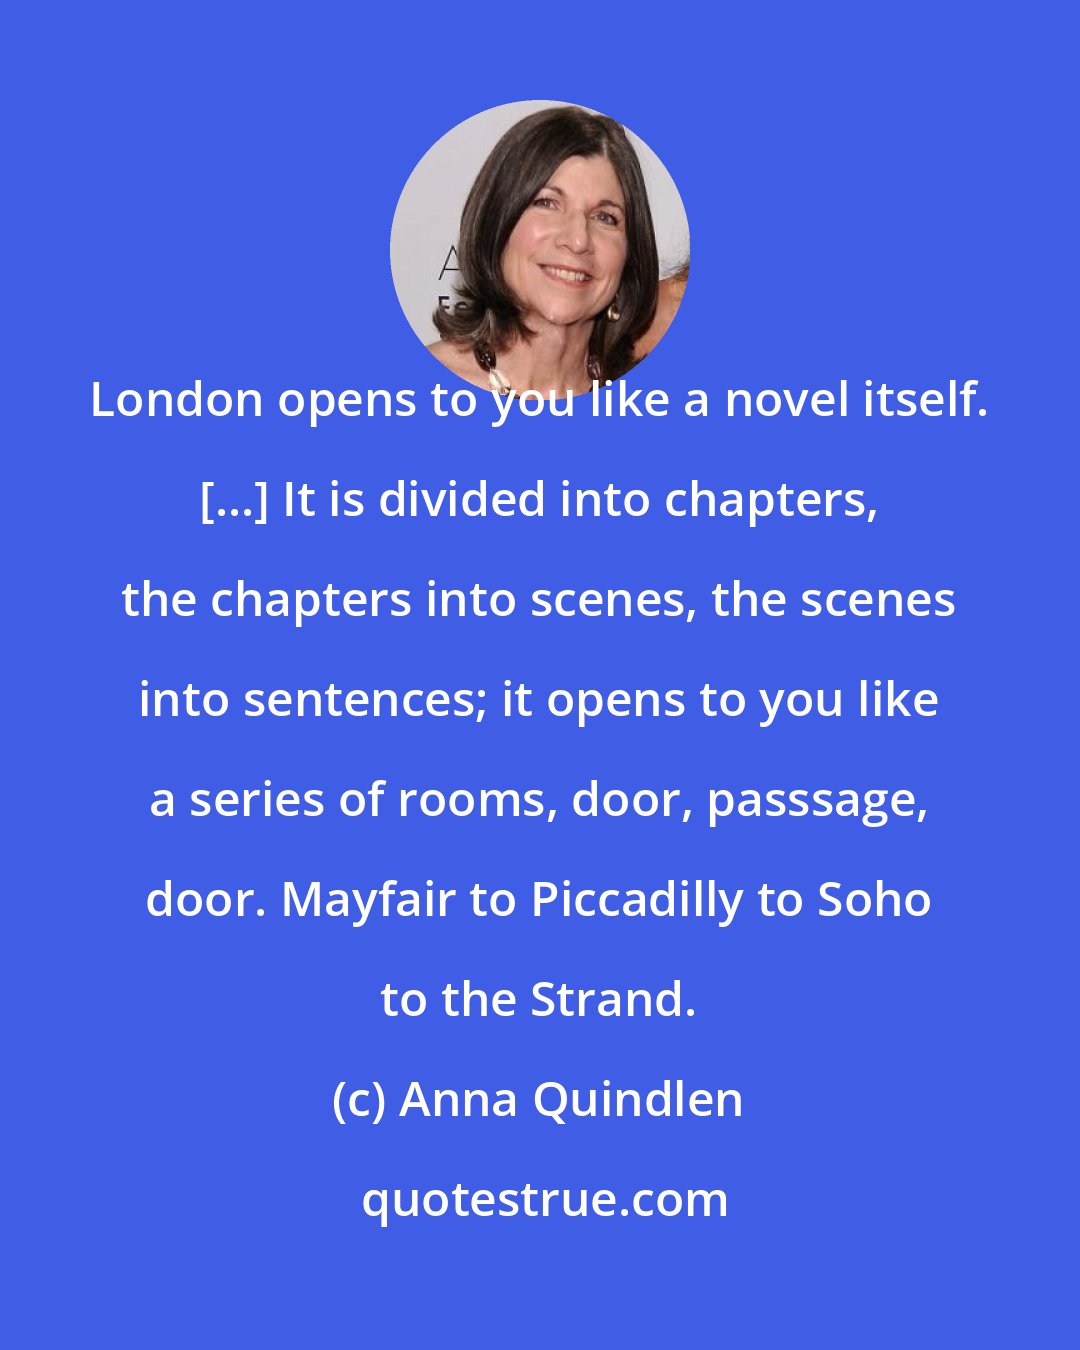 Anna Quindlen: London opens to you like a novel itself. [...] It is divided into chapters, the chapters into scenes, the scenes into sentences; it opens to you like a series of rooms, door, passsage, door. Mayfair to Piccadilly to Soho to the Strand.